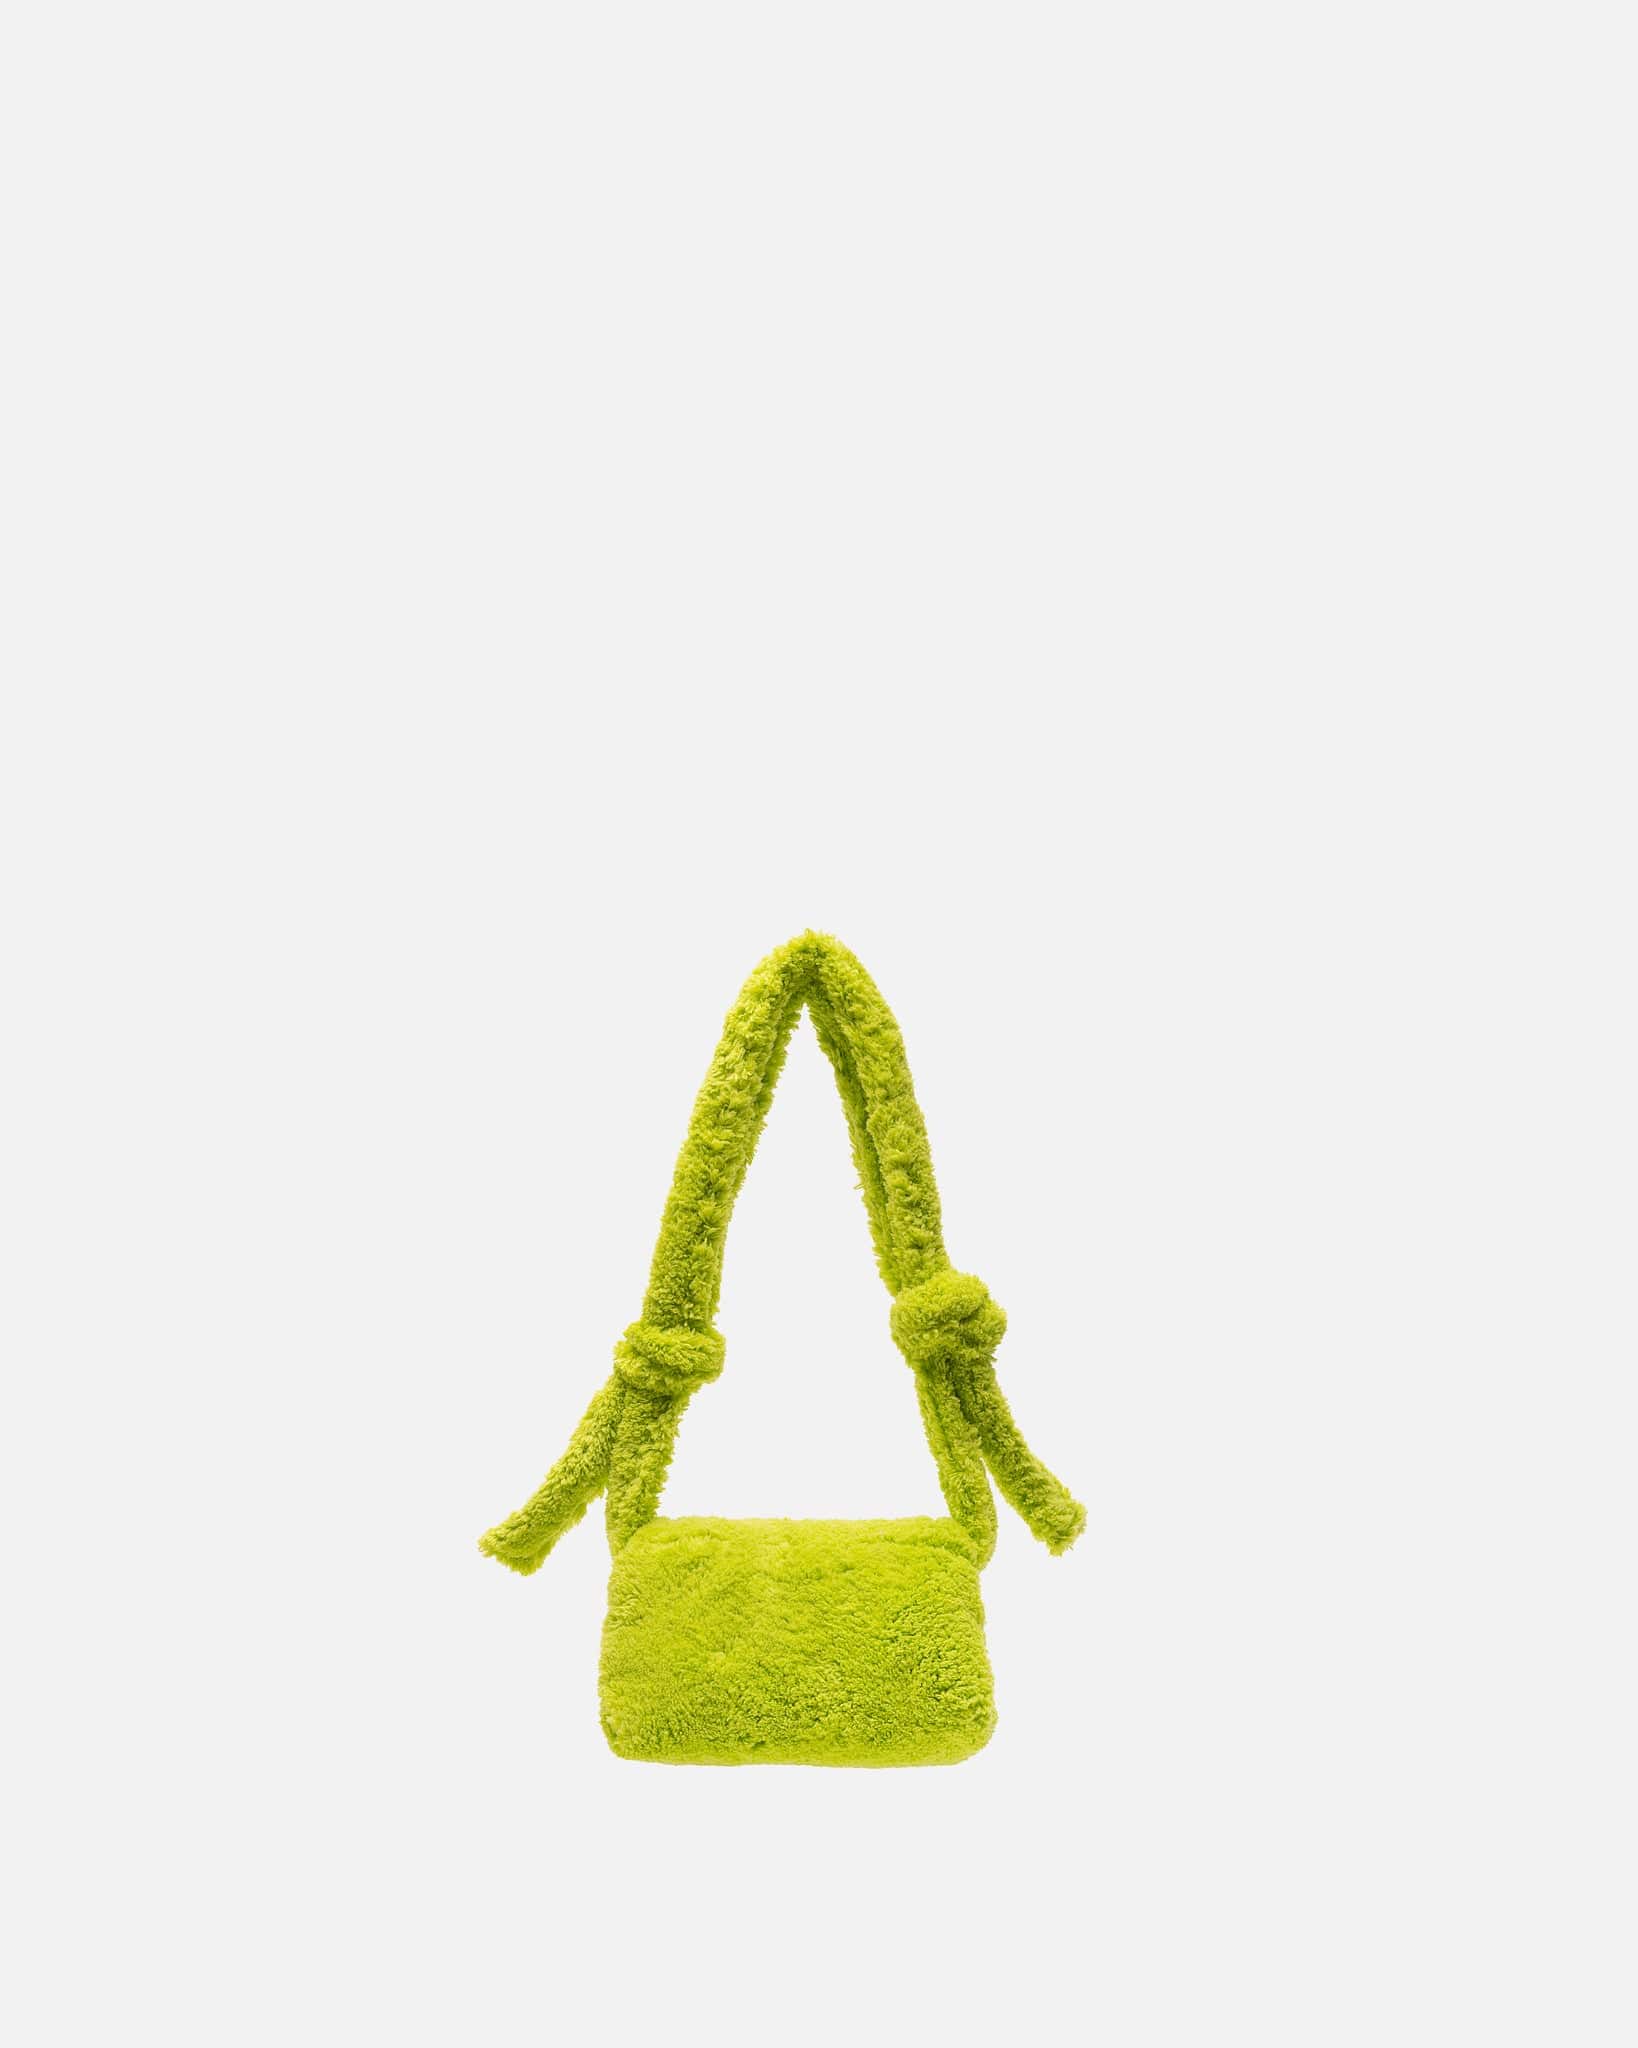 Marni Men's Bags Terry Cloth Large Prism Bag in Light Lime